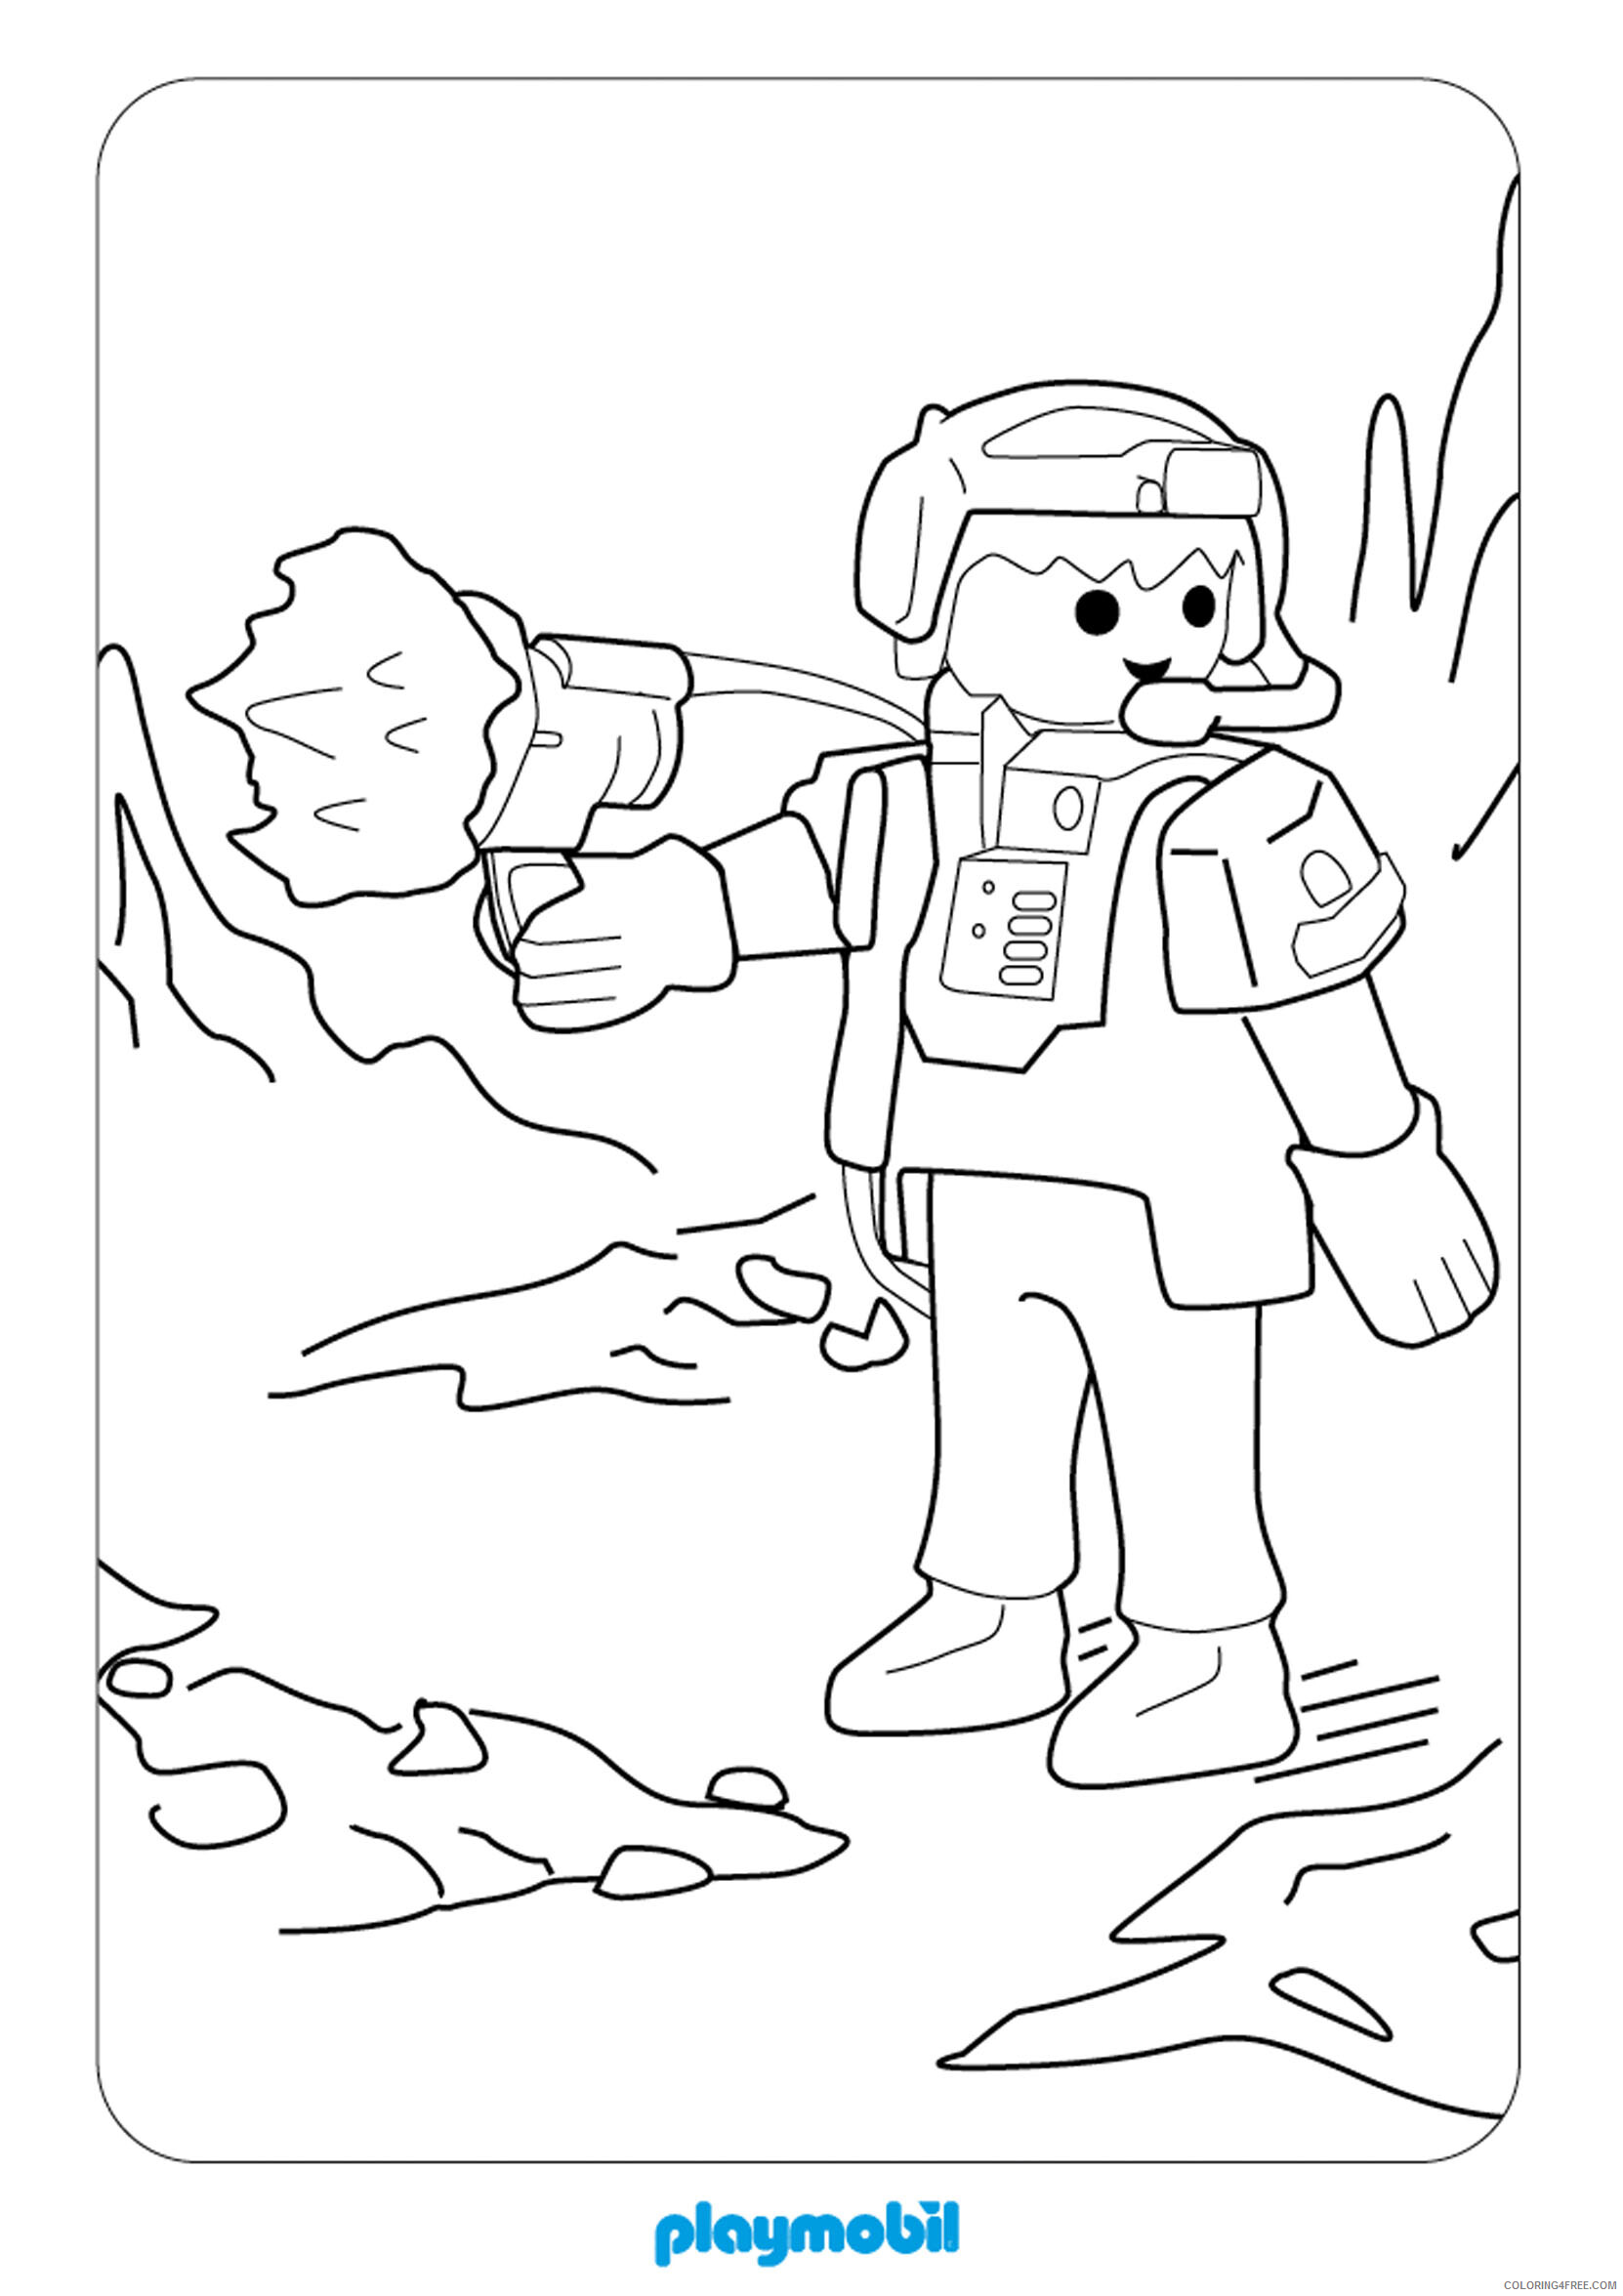 Playmobil Coloring Pages Playmobil Action Printable 2021 4621 Coloring4free